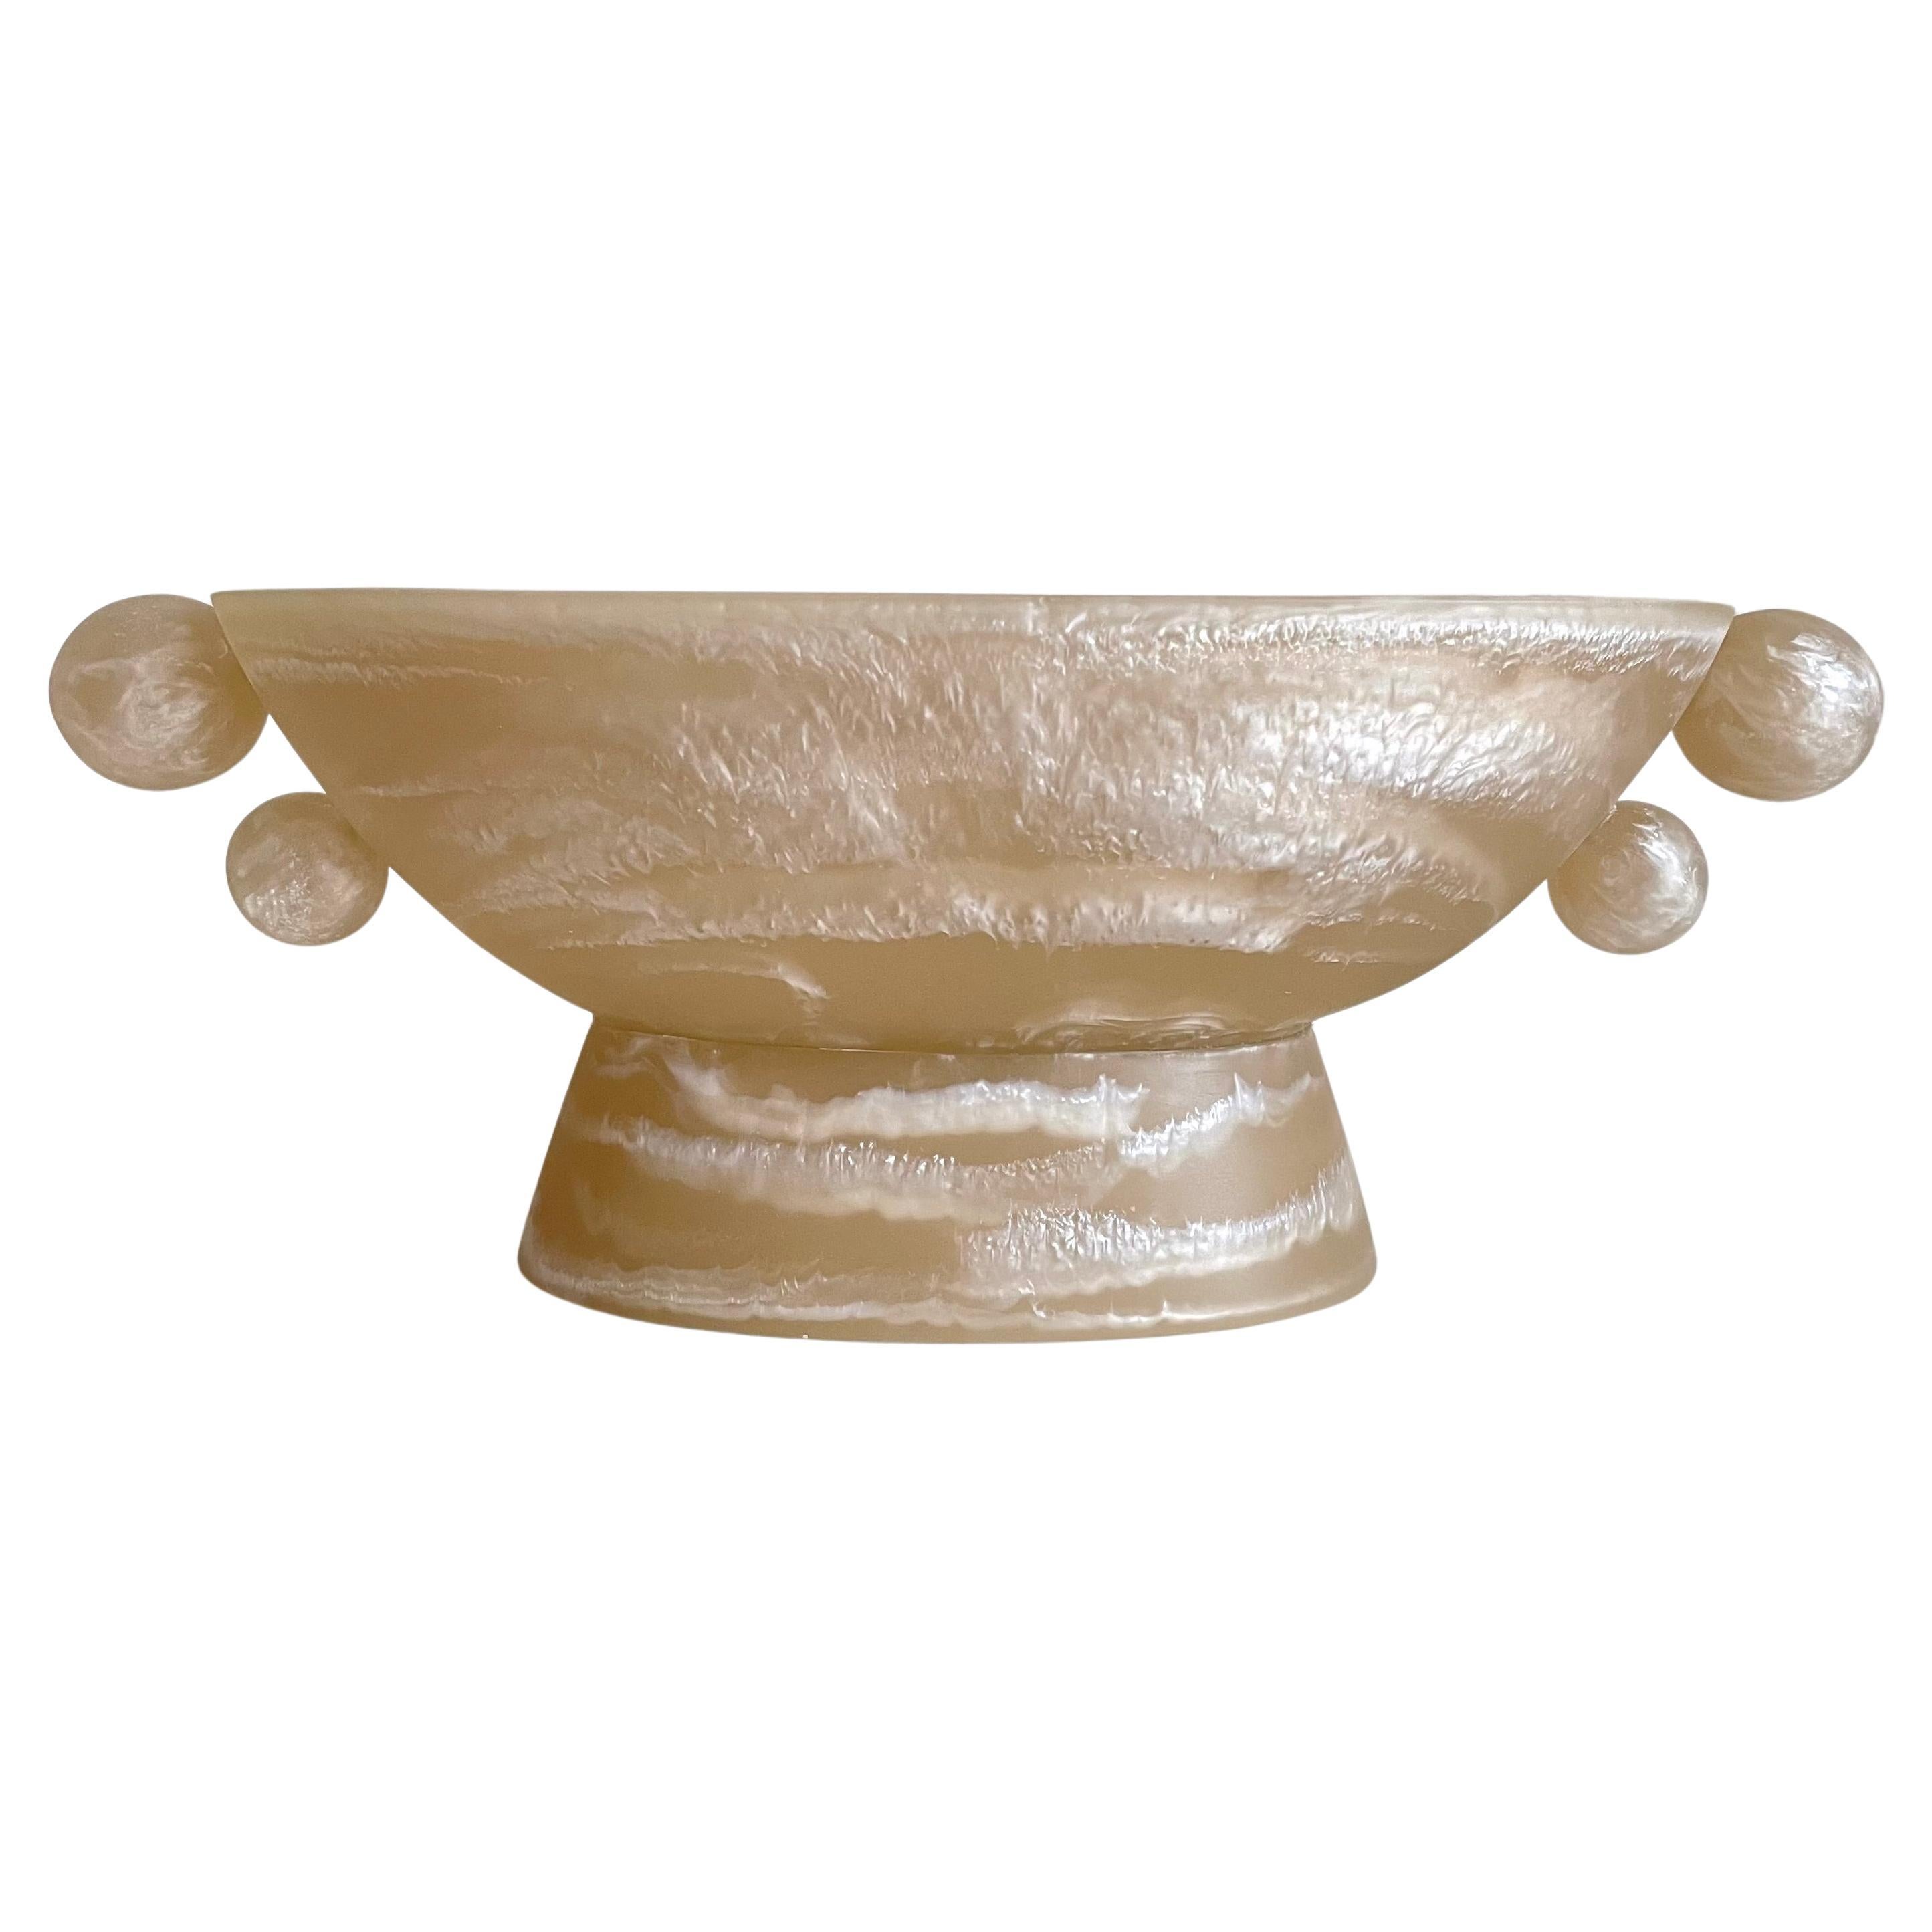 Oval Pedestal Resin Bowl, Beige and Pearl by Paola Valle